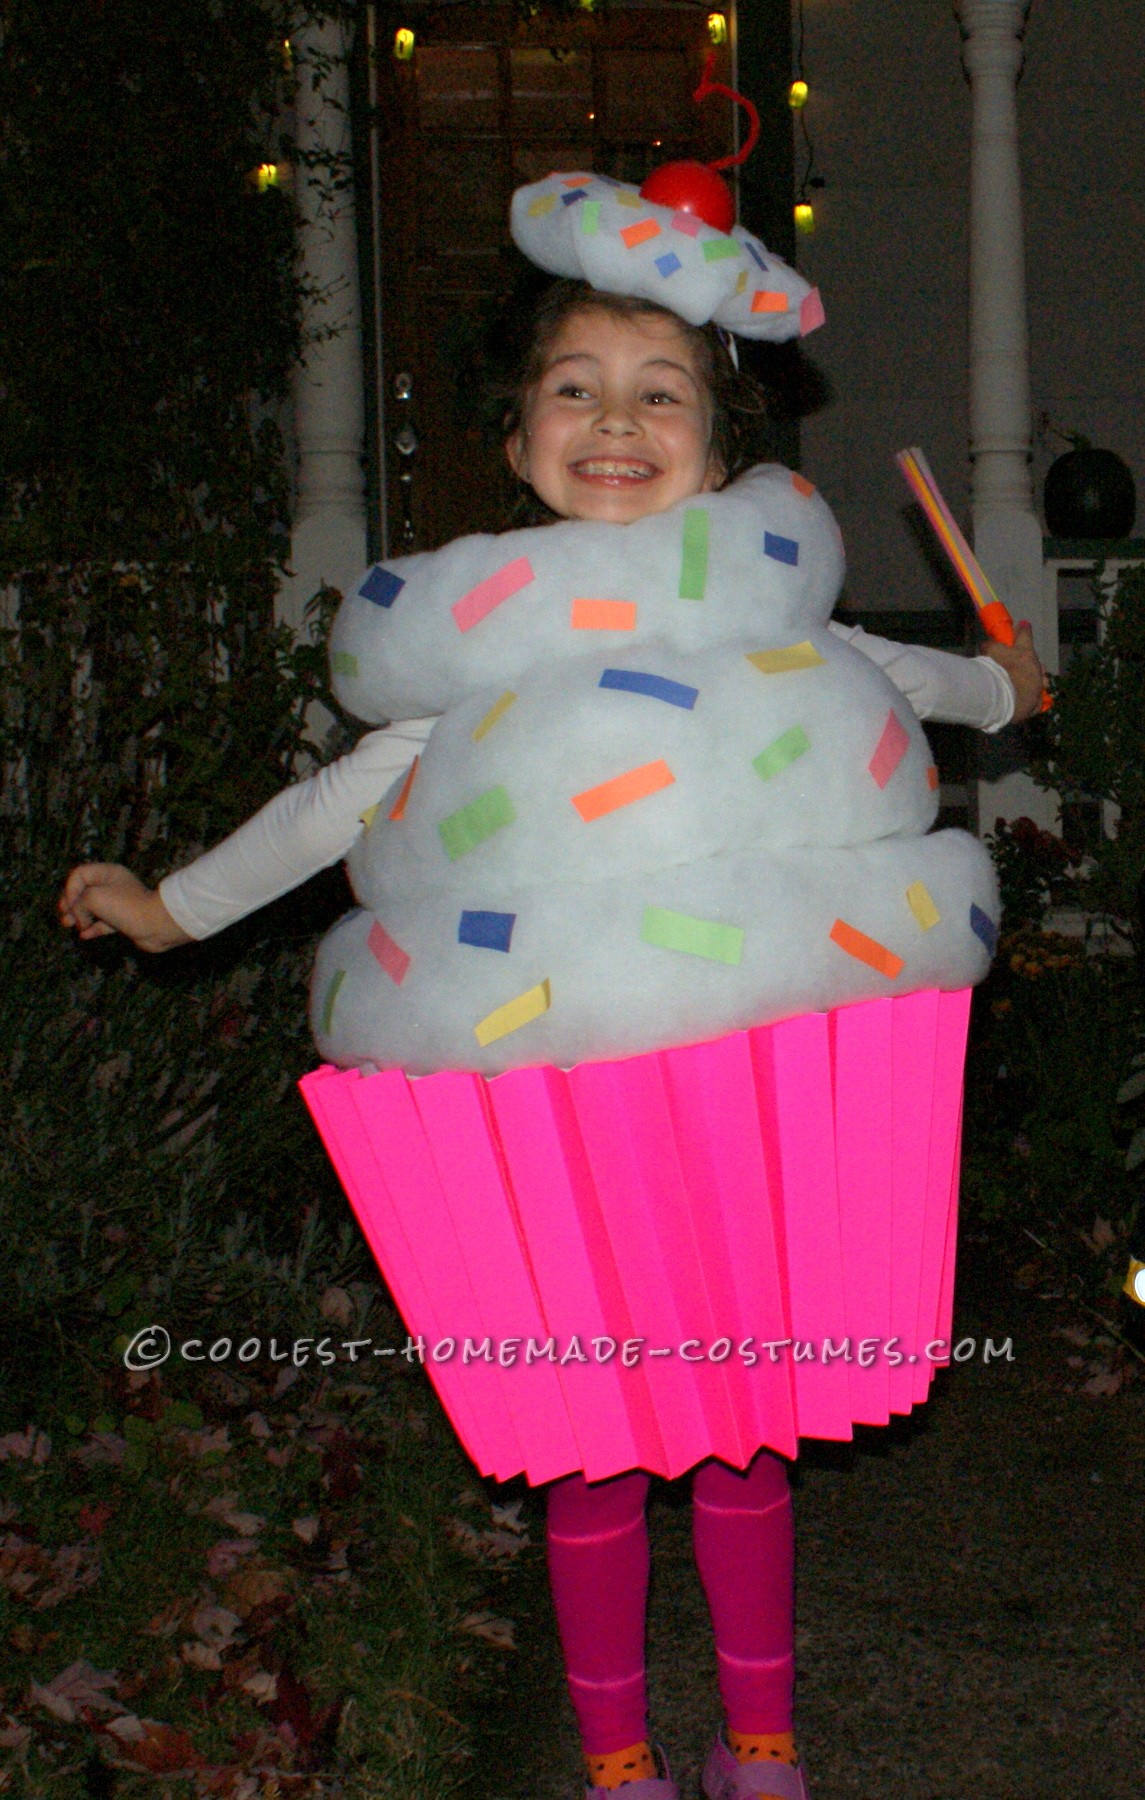 Best Homemade Cupcake Costume for a Girl